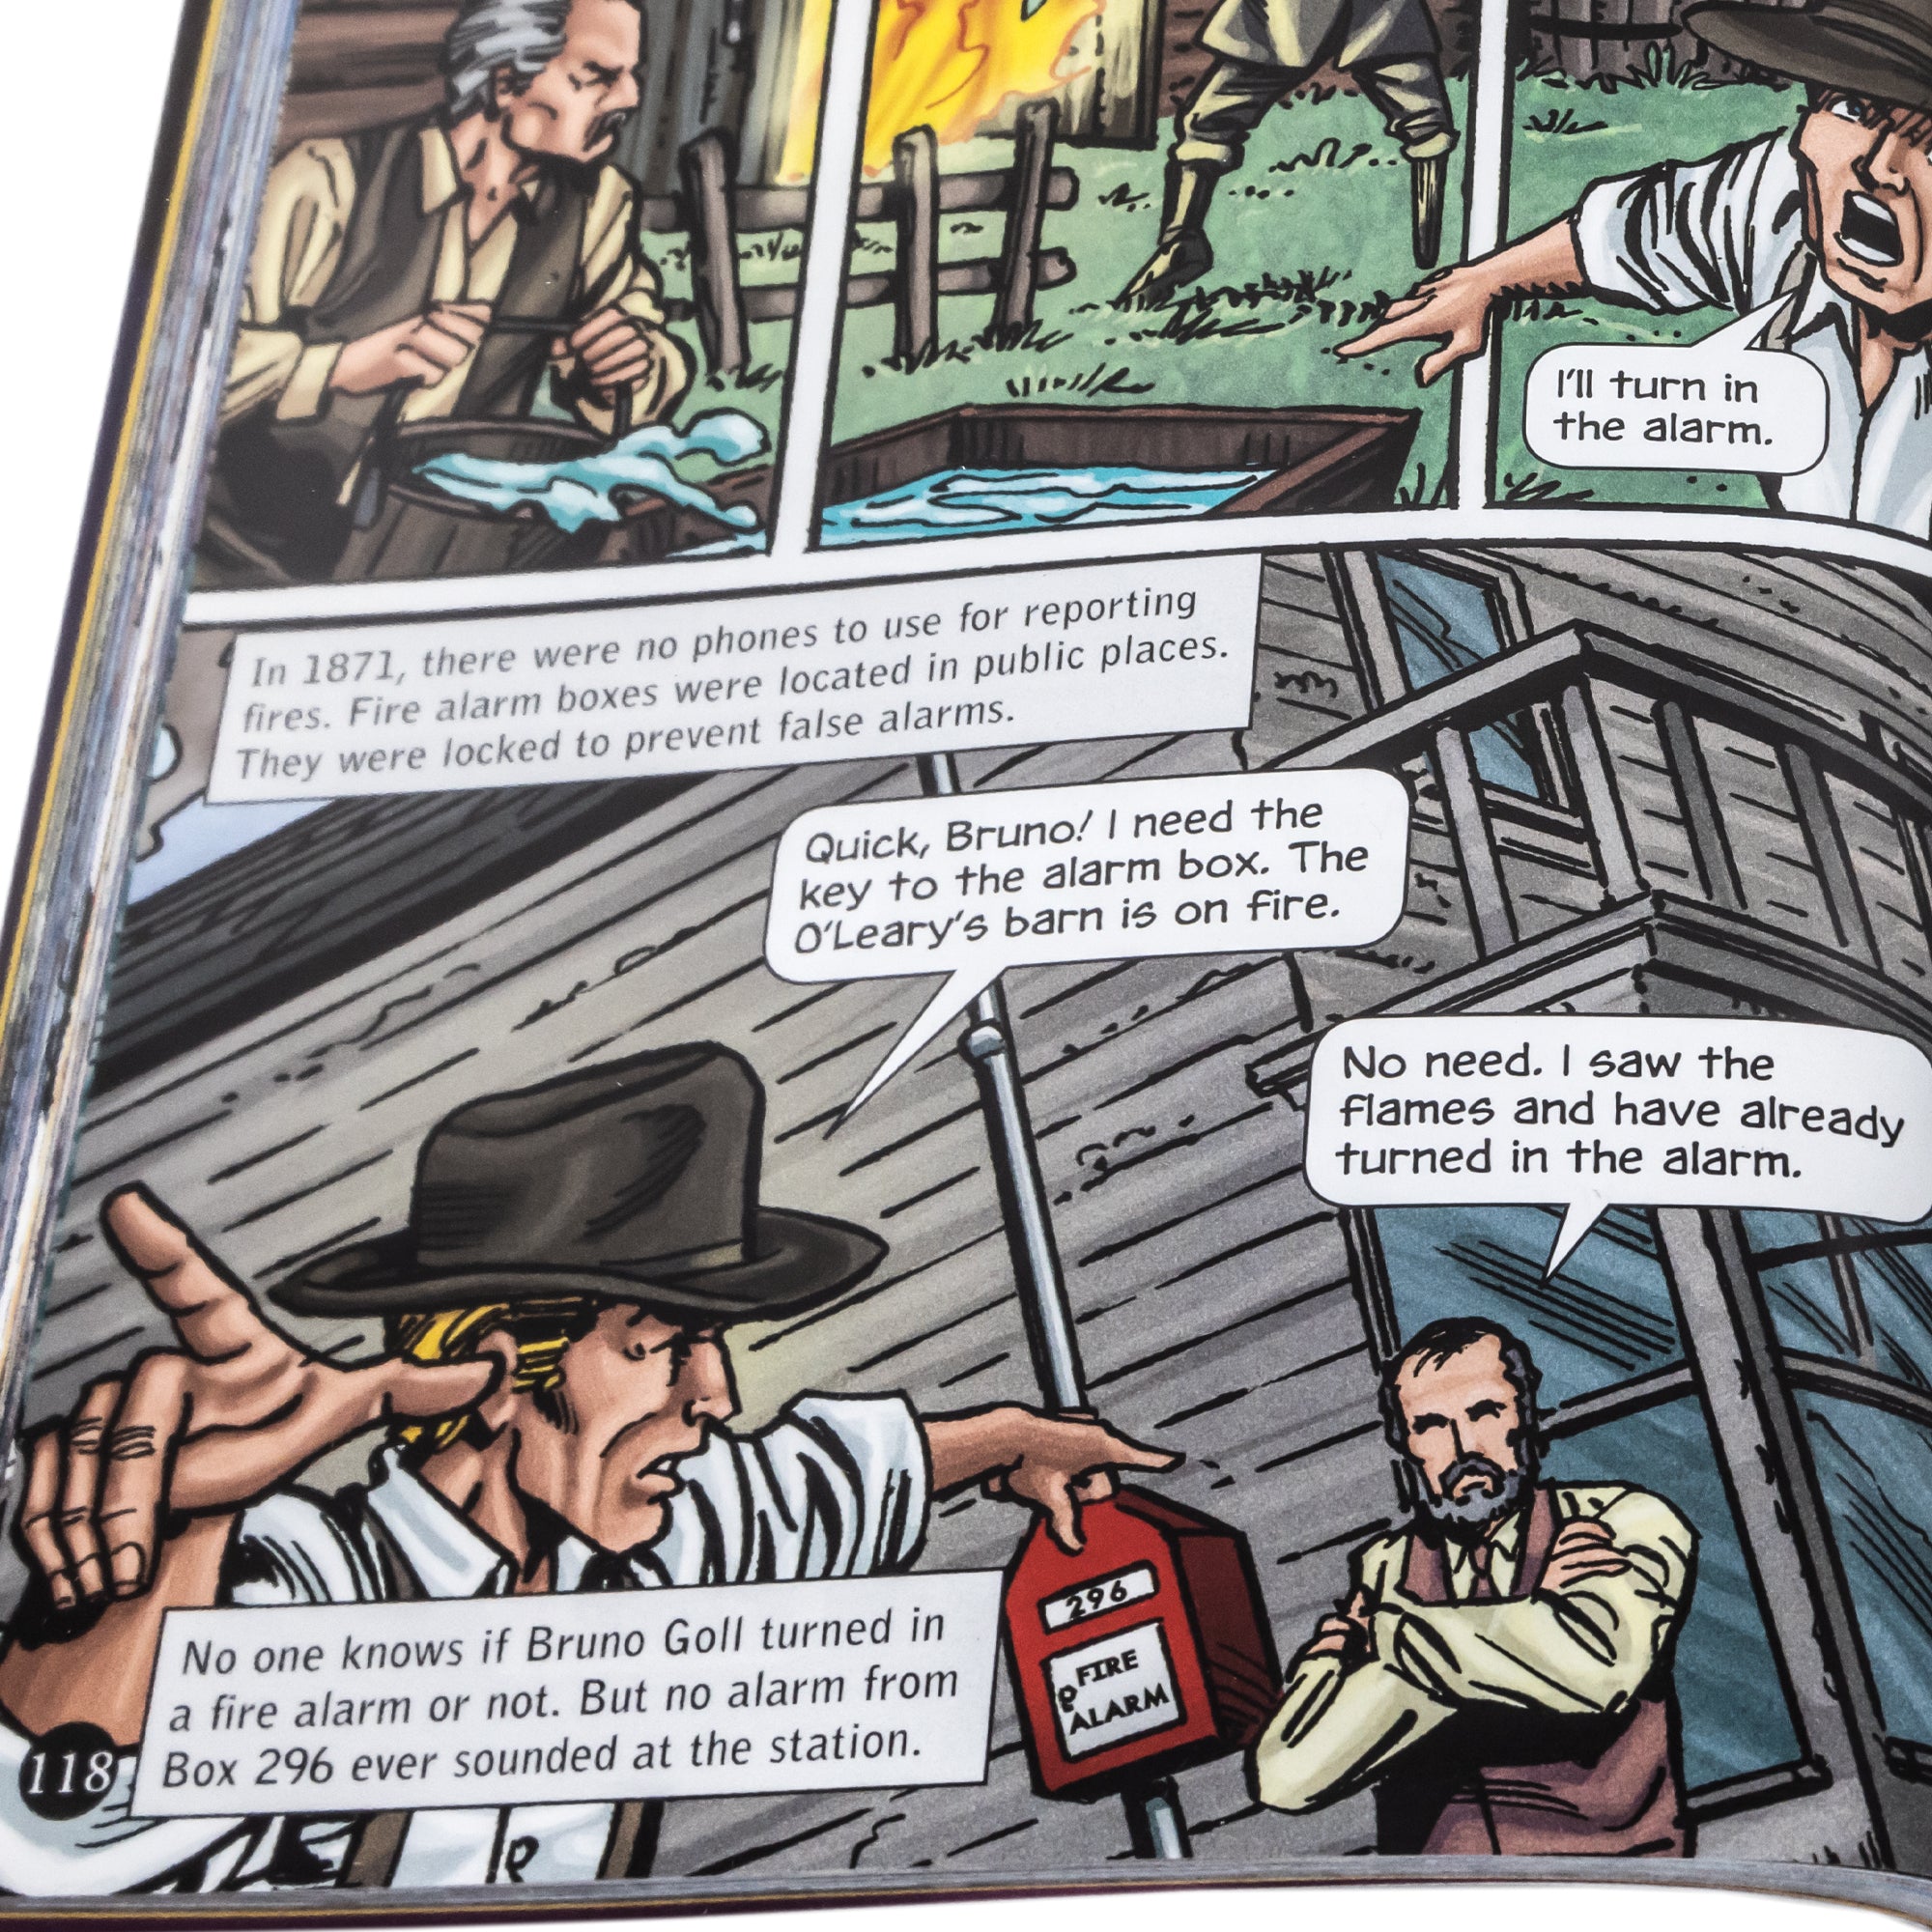 Disasters in History, a graphic novel collection open to show a close up of one of the inside pages. The page shows a barn on fire and a man rushing to turn on the fire alarm, but it was locked. In 1871, you had to have a key to open them. A man asks another man to turn it on, and he said he did, but the alarm never sounded at the station. The book is a comic book style layout with squared illustrations and talk bubbles.